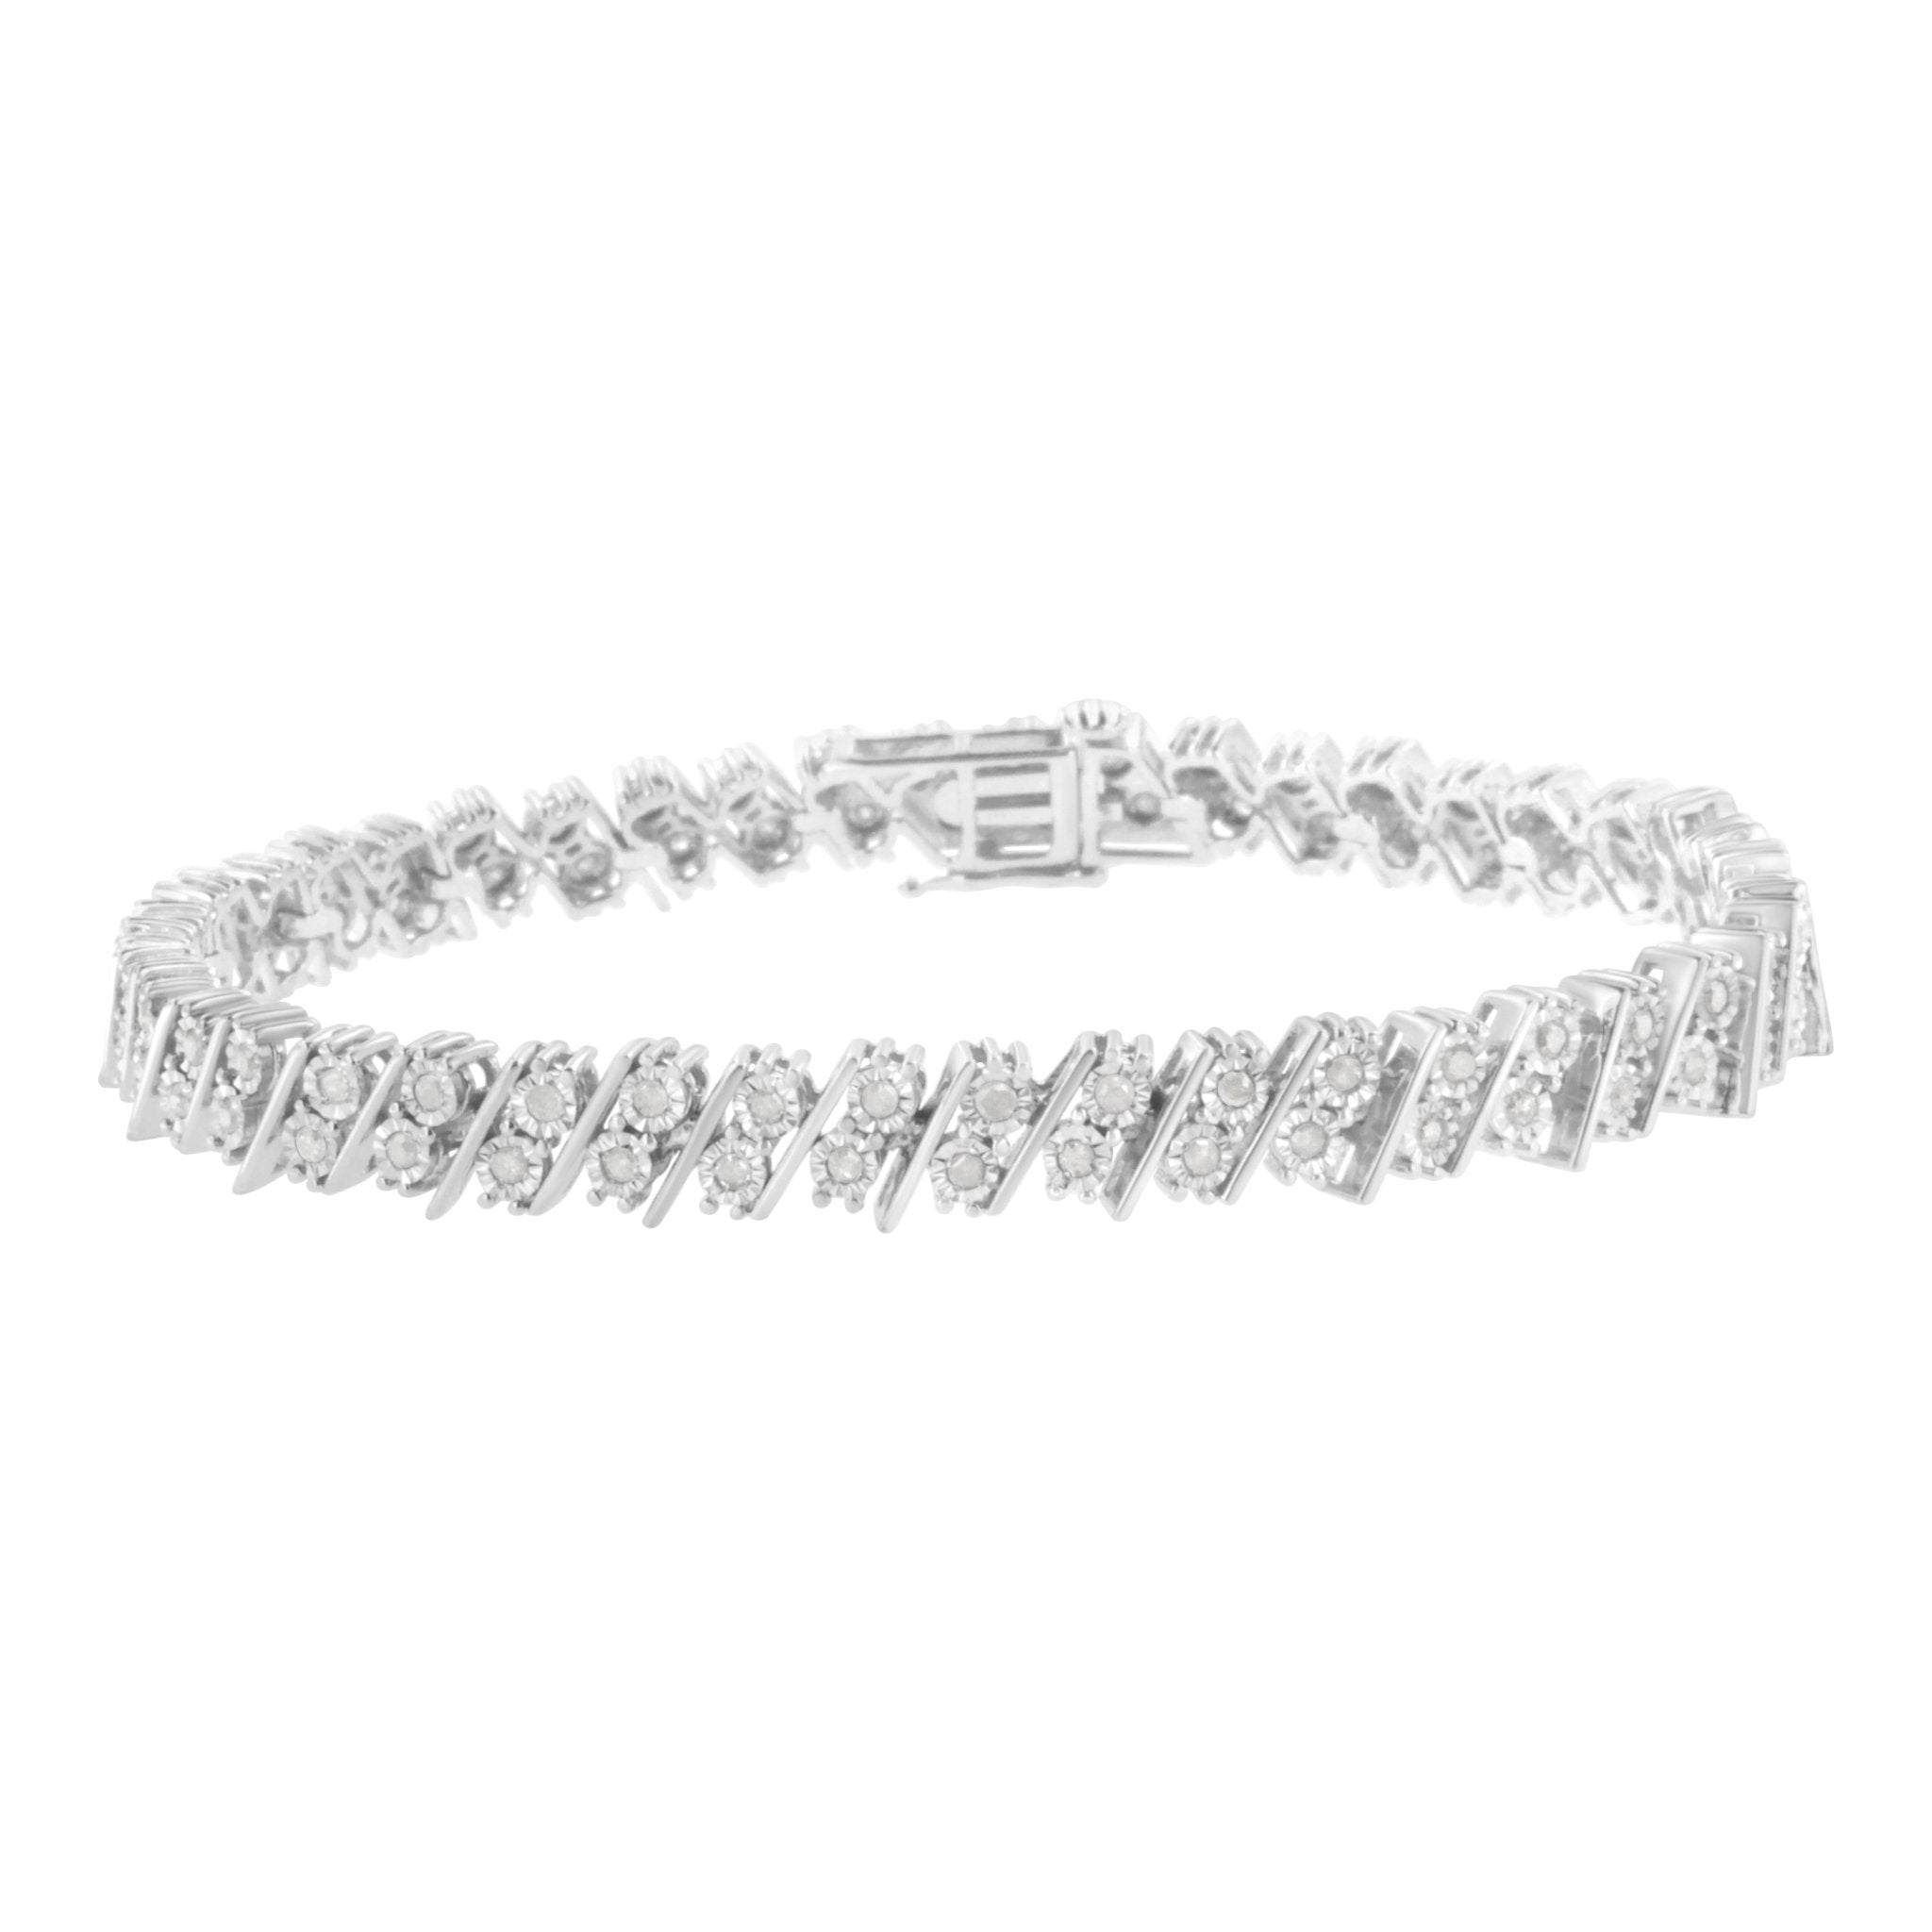 .925 Sterling Silver 1 Cttw Double Row Miracle Set Diamond Link Bracelet (I-J Clarity, I3 Color) - Size 7.25" - Tuesday Morning-Bracelets